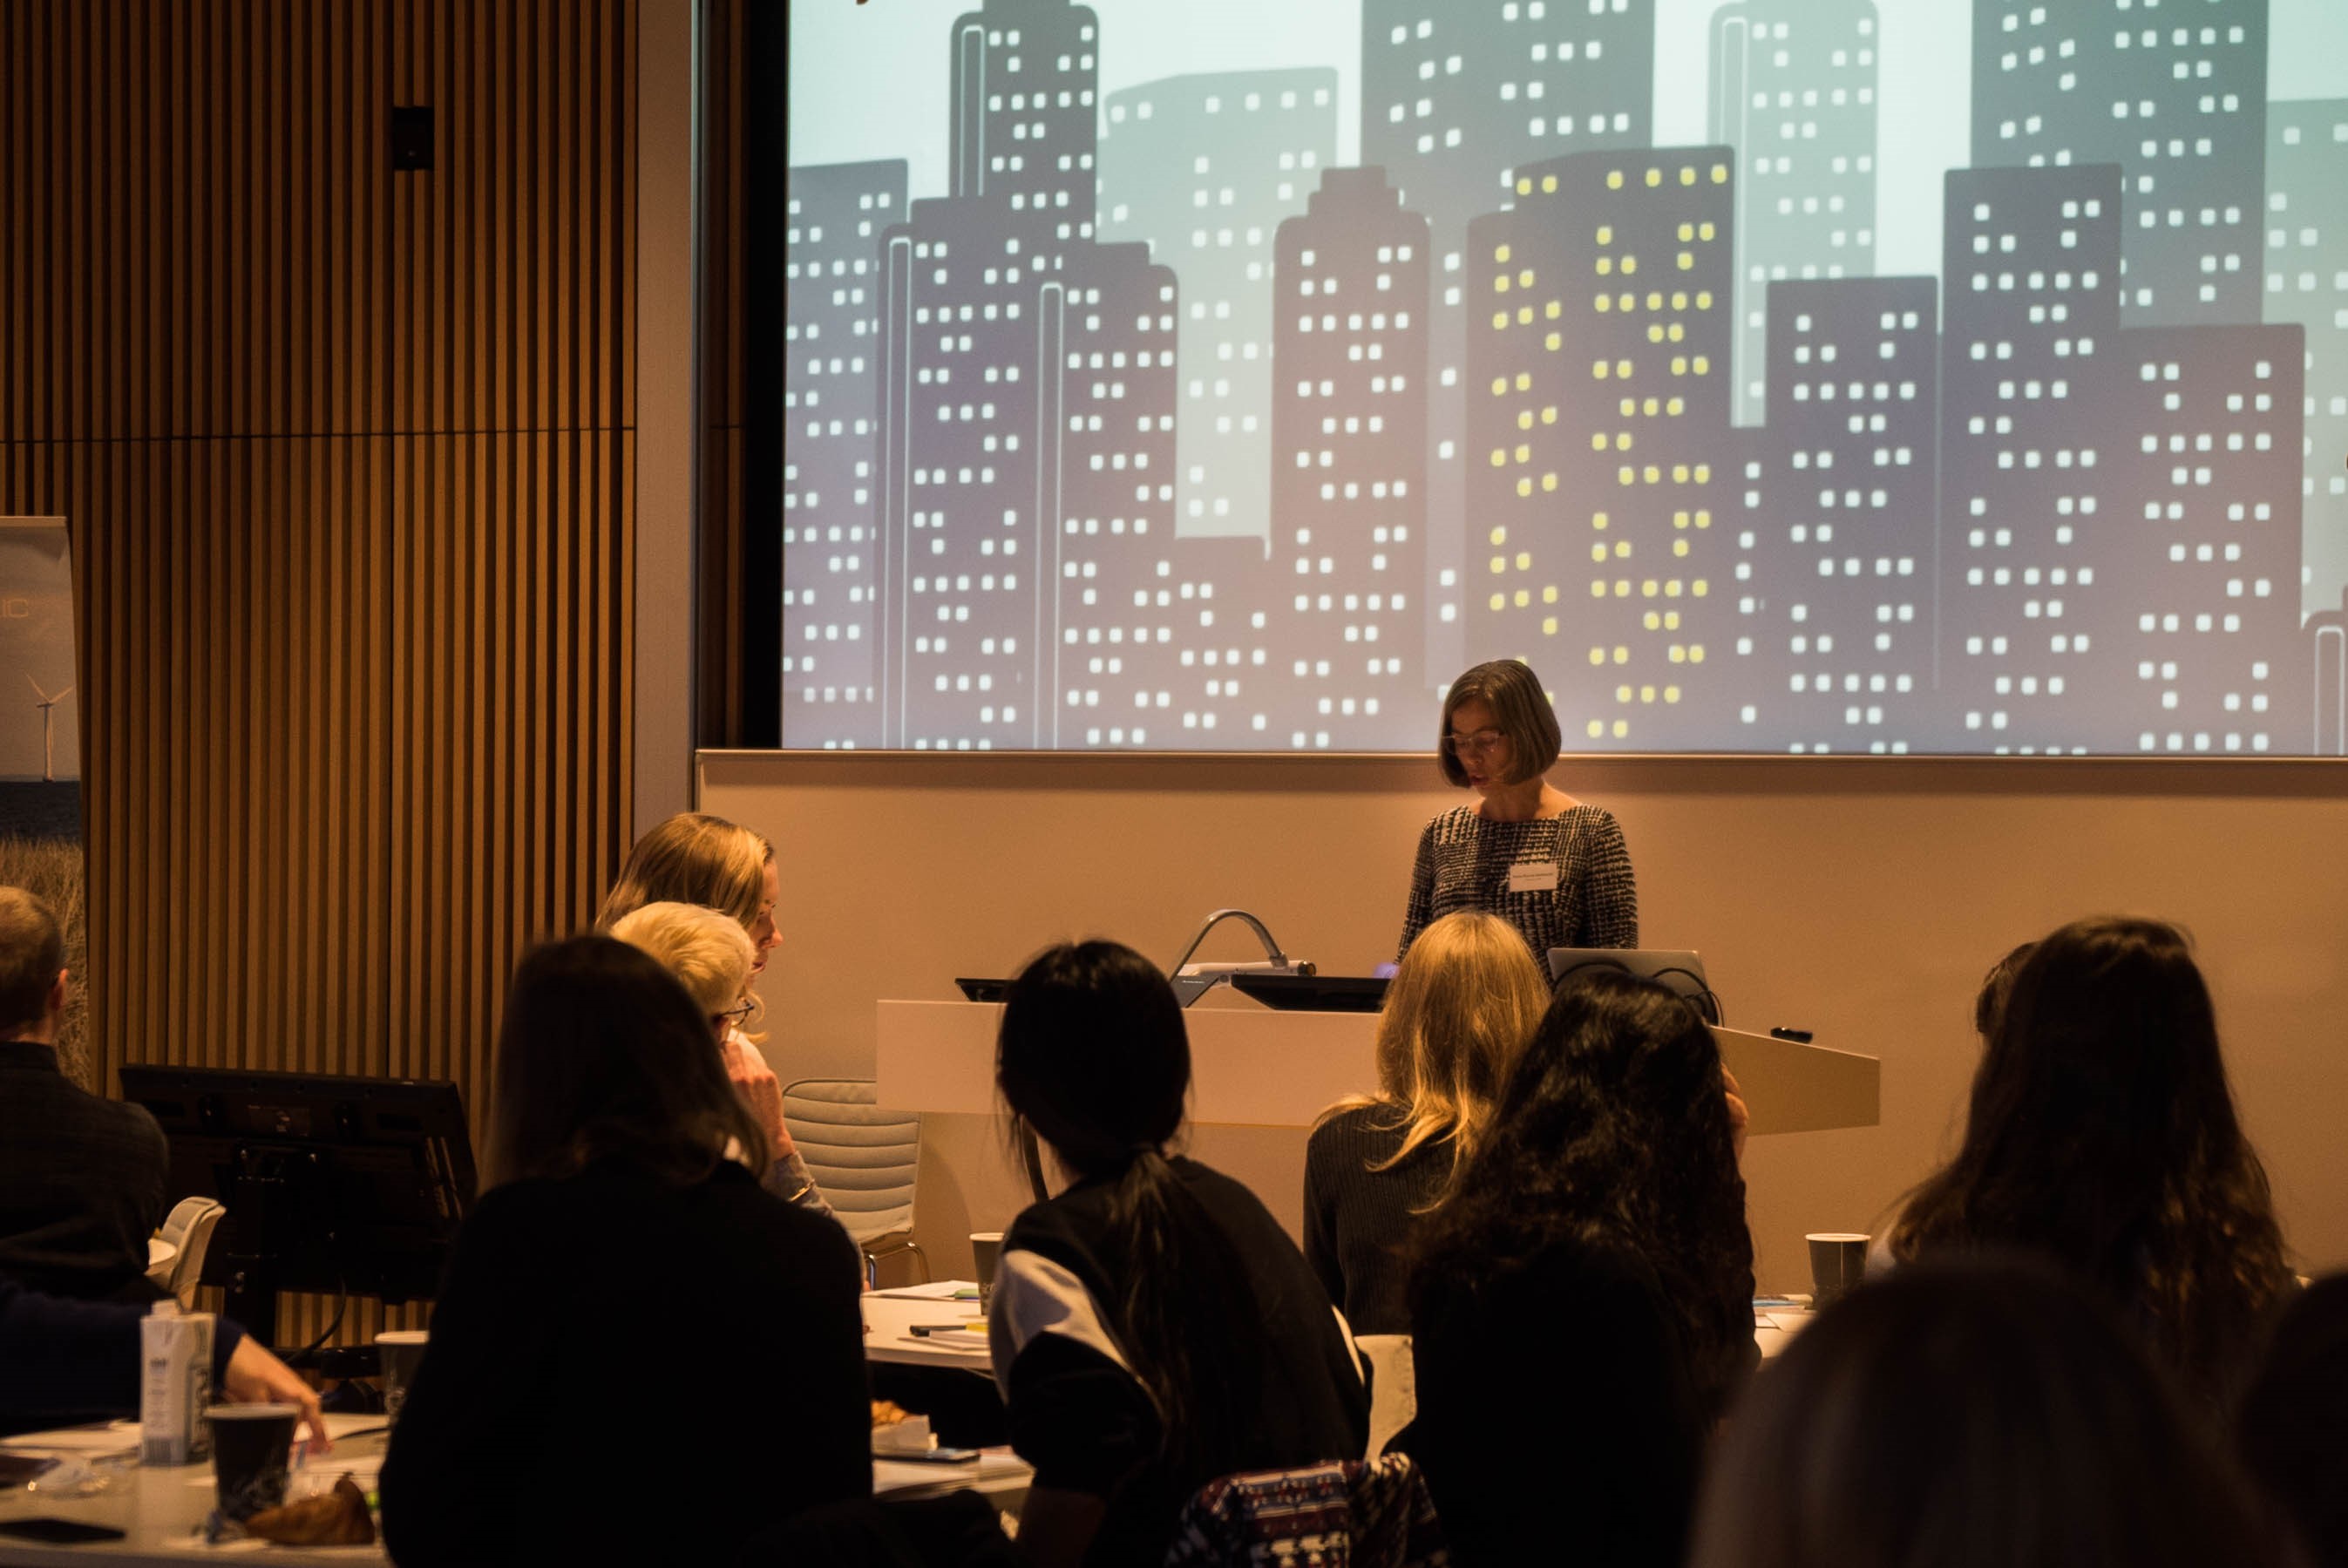 Prorector Bente Merete Stallknecht opened the 2018 Global Health Case Challenge and 15 teams began 24 hours of hard work to find and present the most innovative and cross-disciplinary solution to the case: “How can planning of urban public space contribute to climate change mitigation goals and benefit mental well-being among vulnerable populations?”